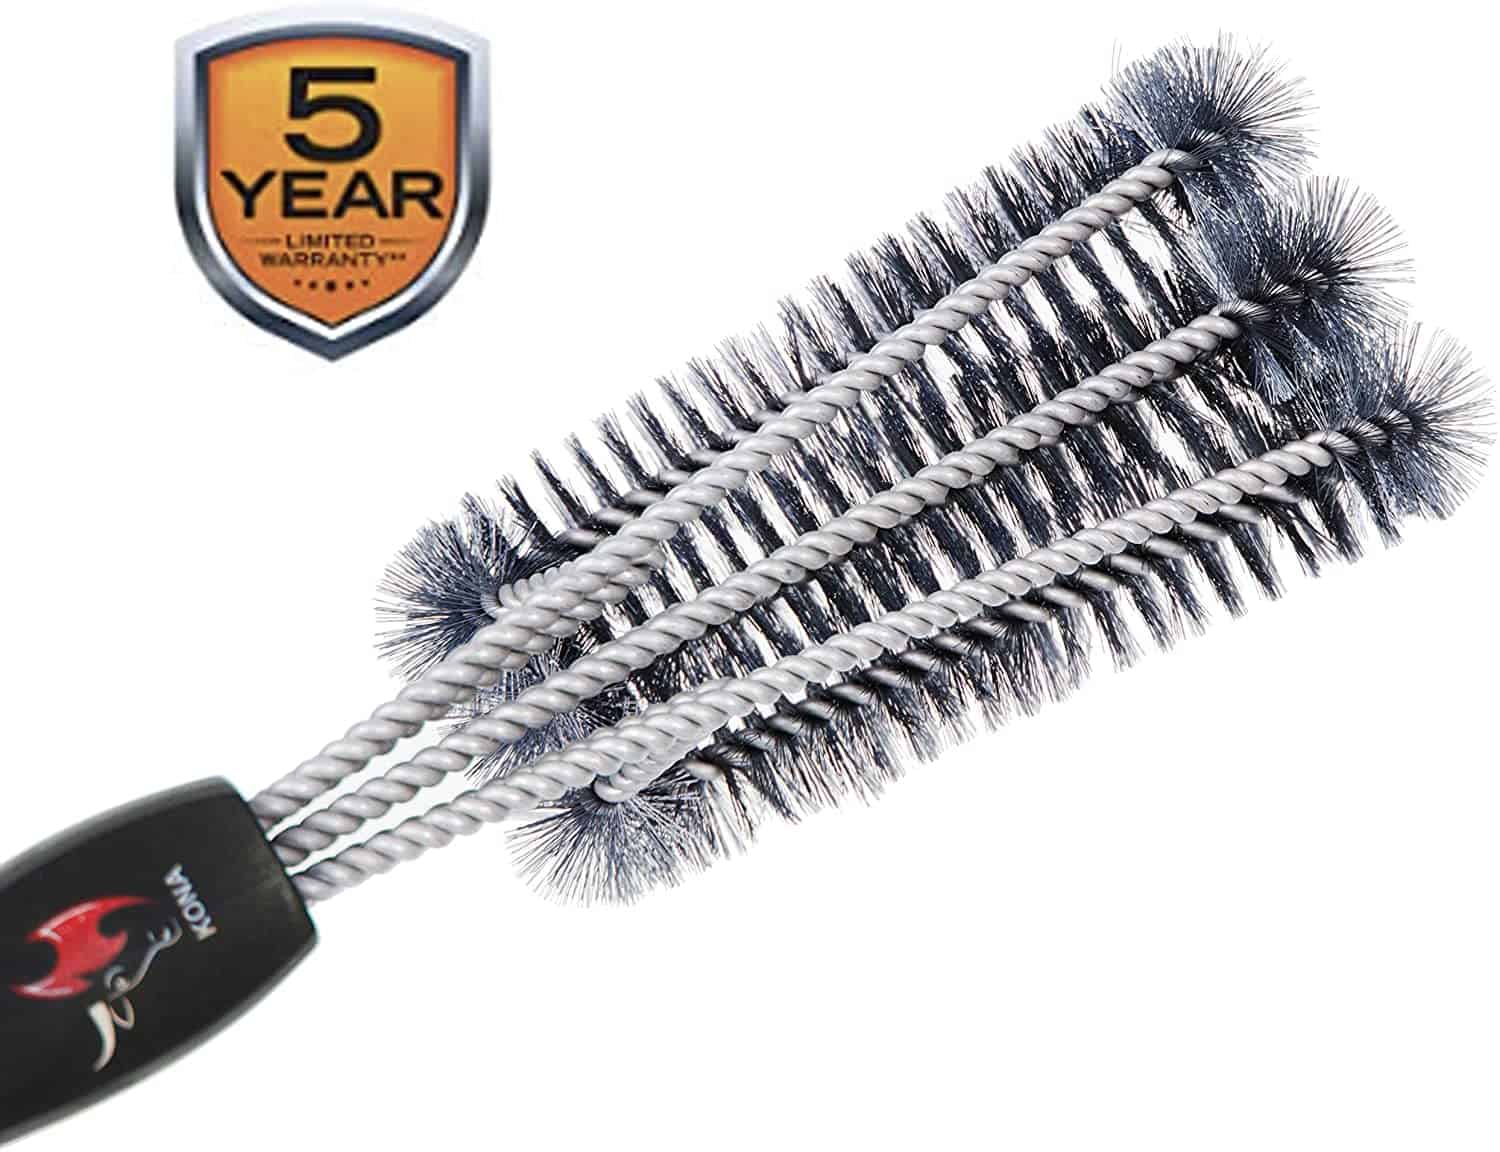 Best overall grill brush- Kona 360° stainless steel 3-in-1 grill cleaner